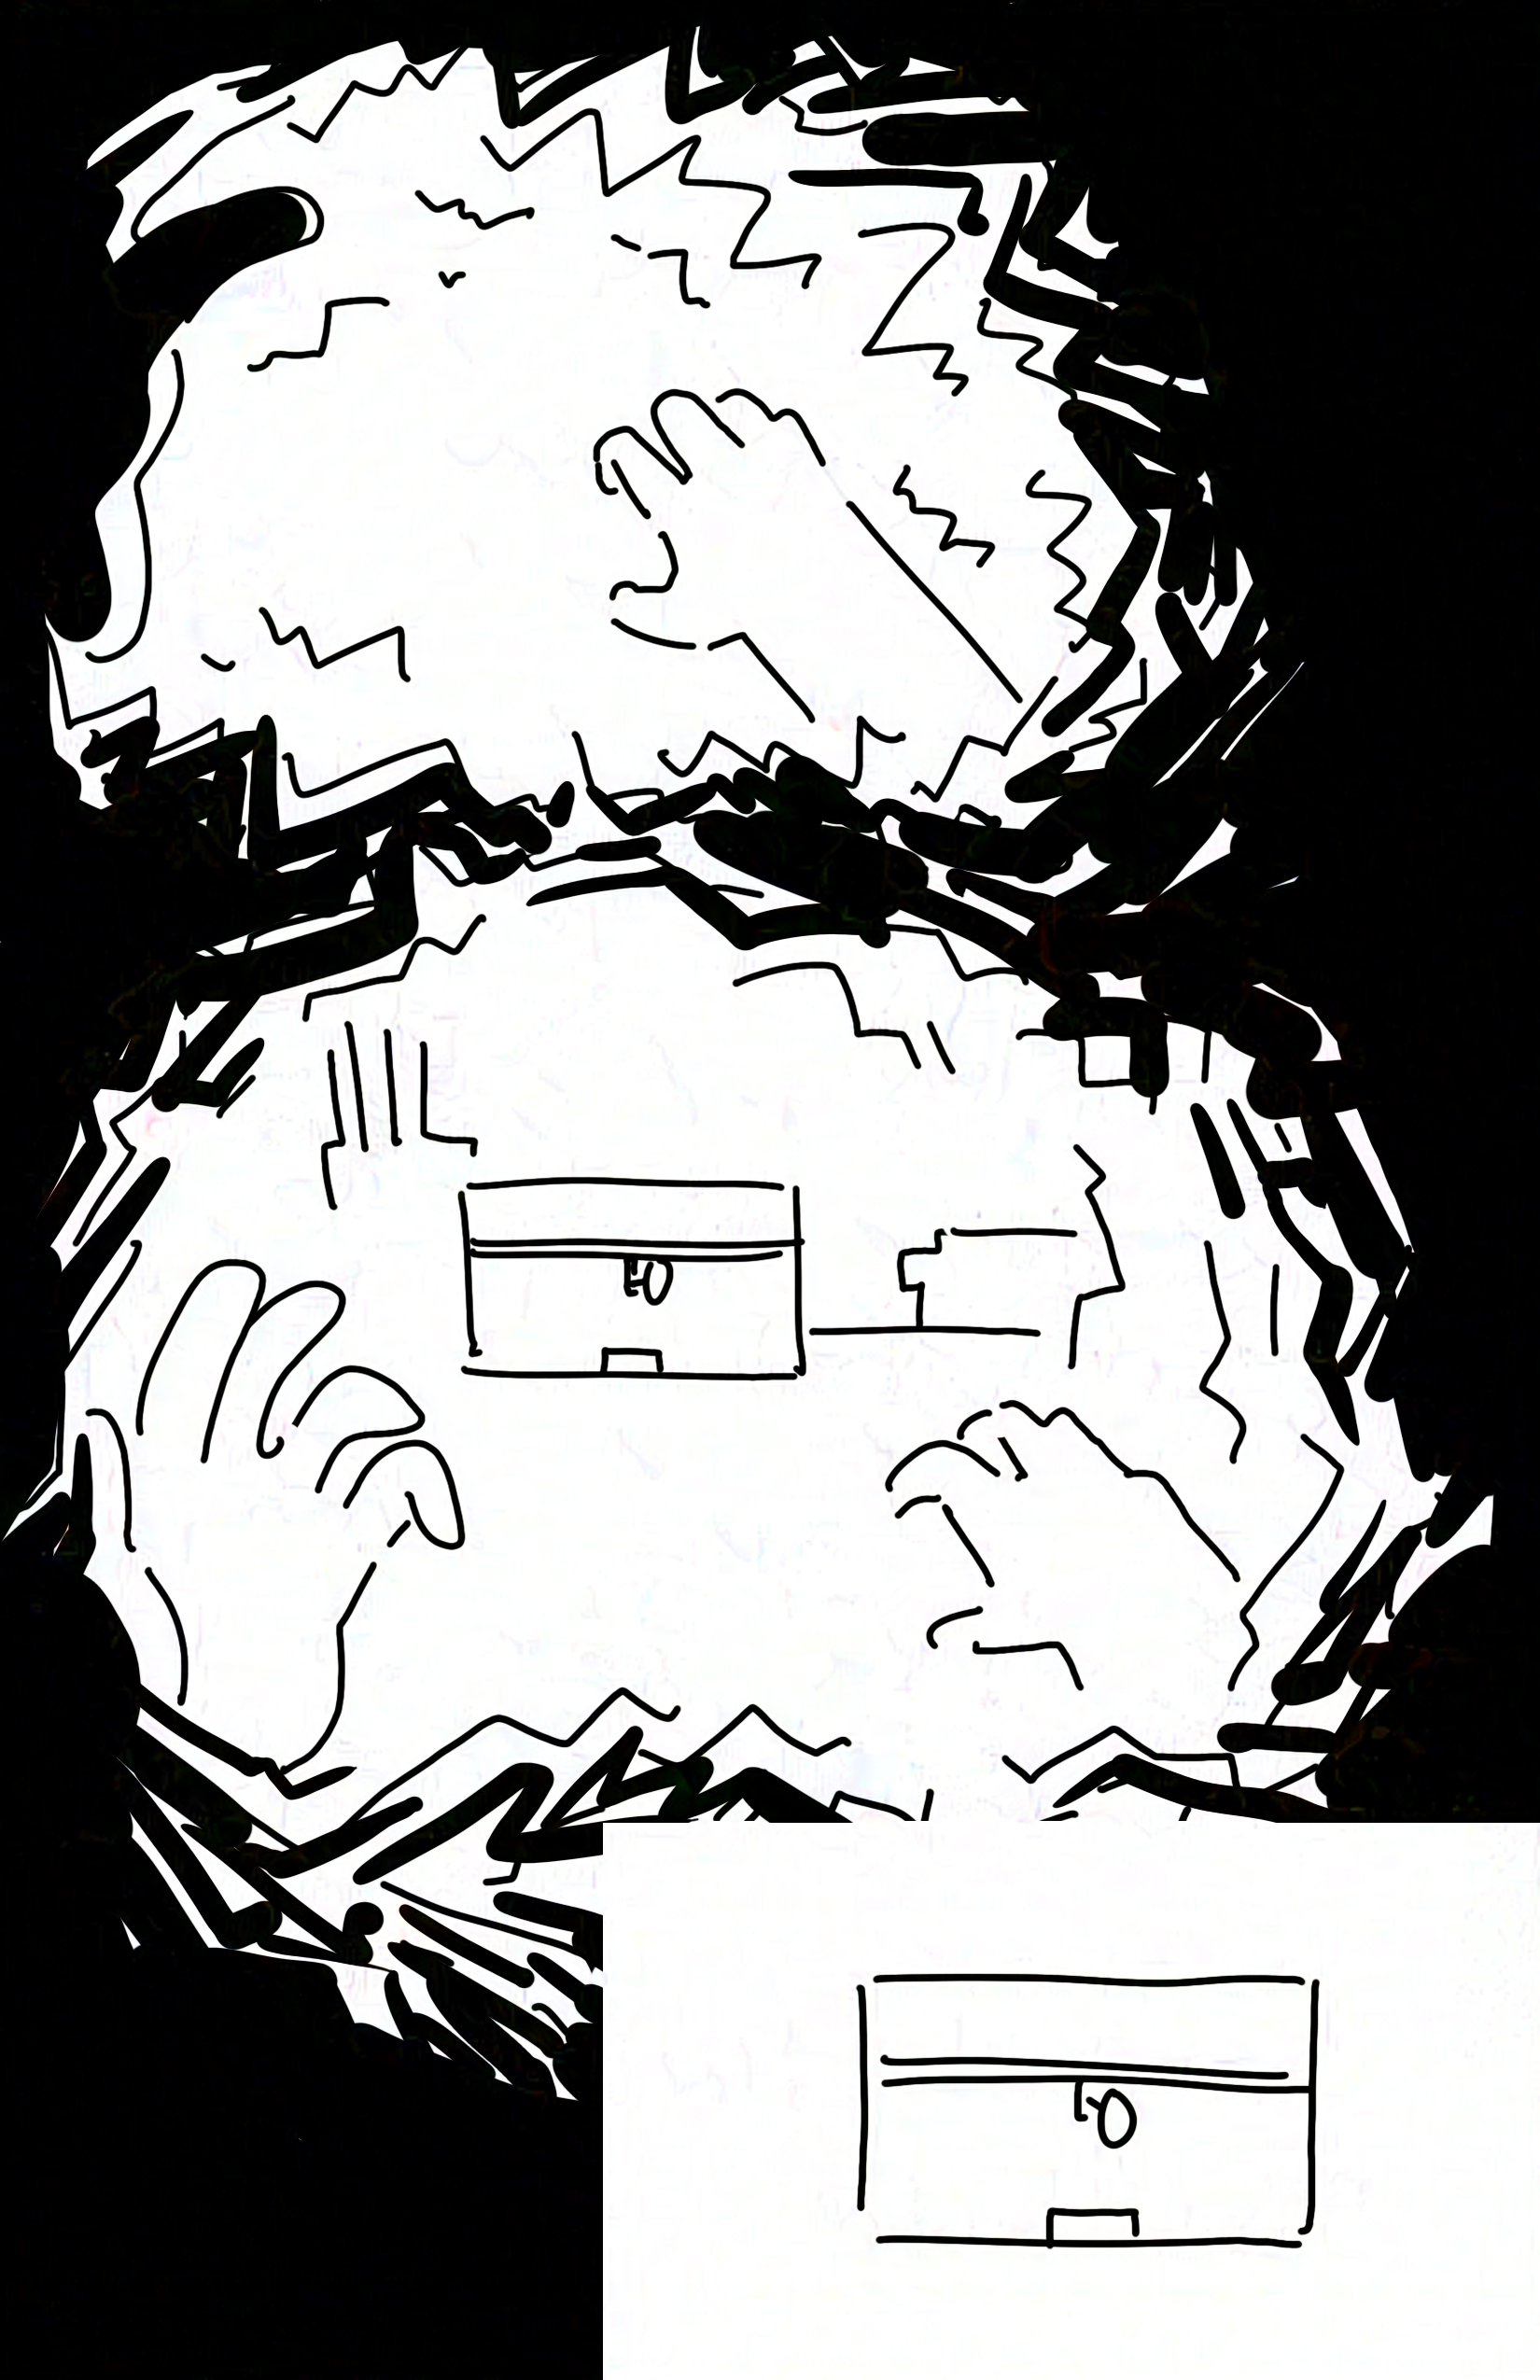 Panel 1: First person view from the librarian, the shaking lines blacking out at the edge of their vision. The edge of a hand can be seen close to their face with the other hand clenched on the table in front of them.
Panel 2: The librarian looking up slightly and seeing the box with the key in it in front of them on the desk.
Panel 3: The box standing alone in a white panel that cuts through the noise.